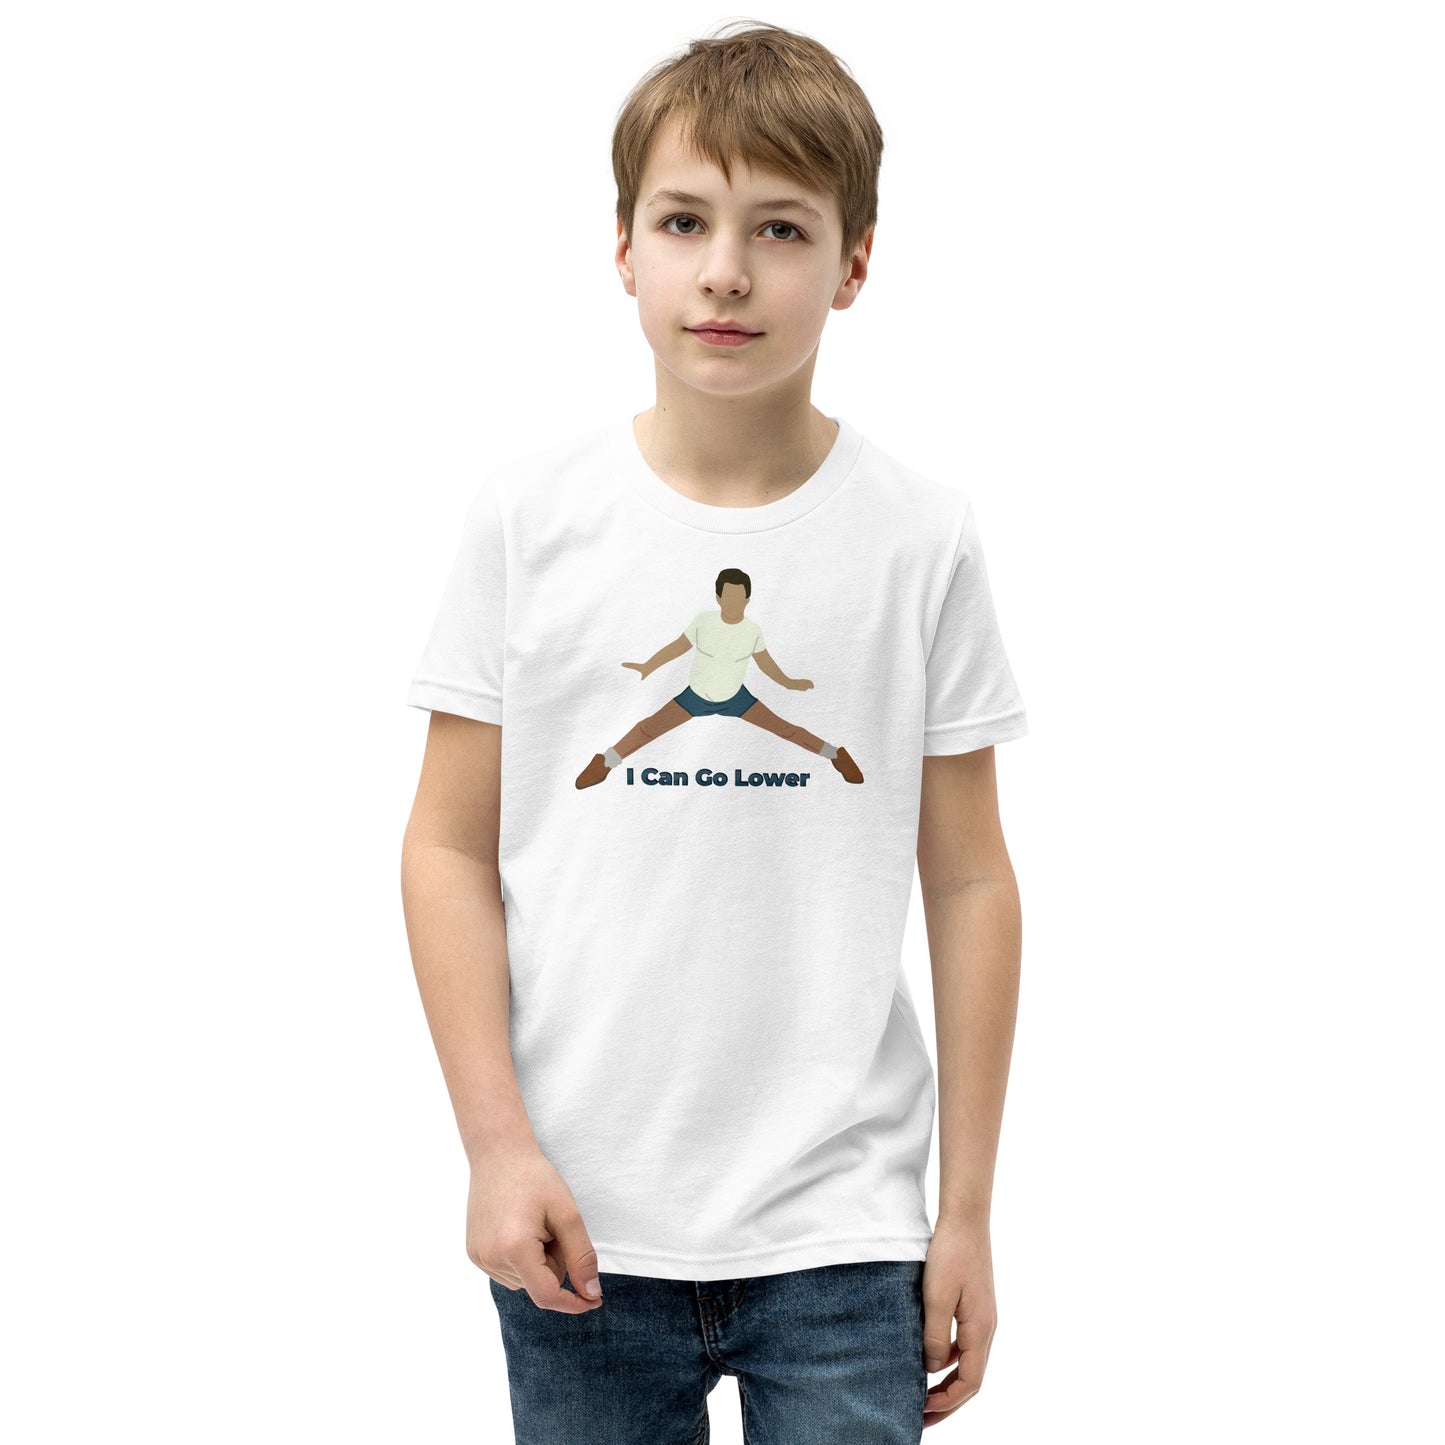 I Can Go Lower - Youth Short Sleeve T-Shirt